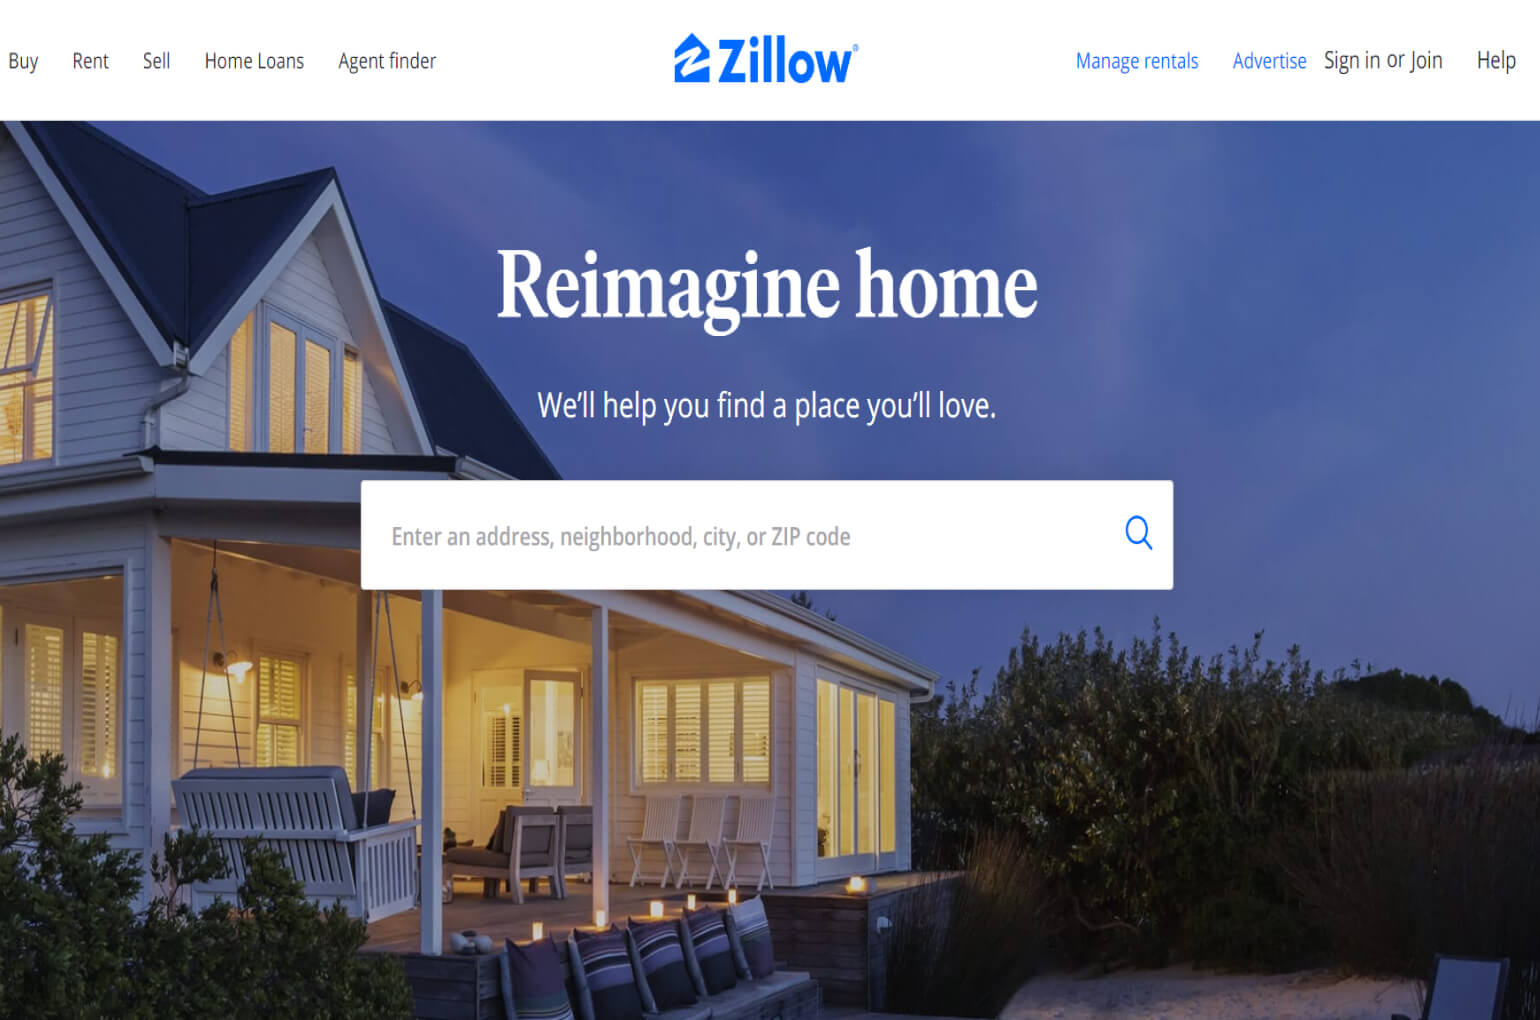 Proptech Giant Zillow Hits A Home Run With Their Excellent Performance -Body Image 2